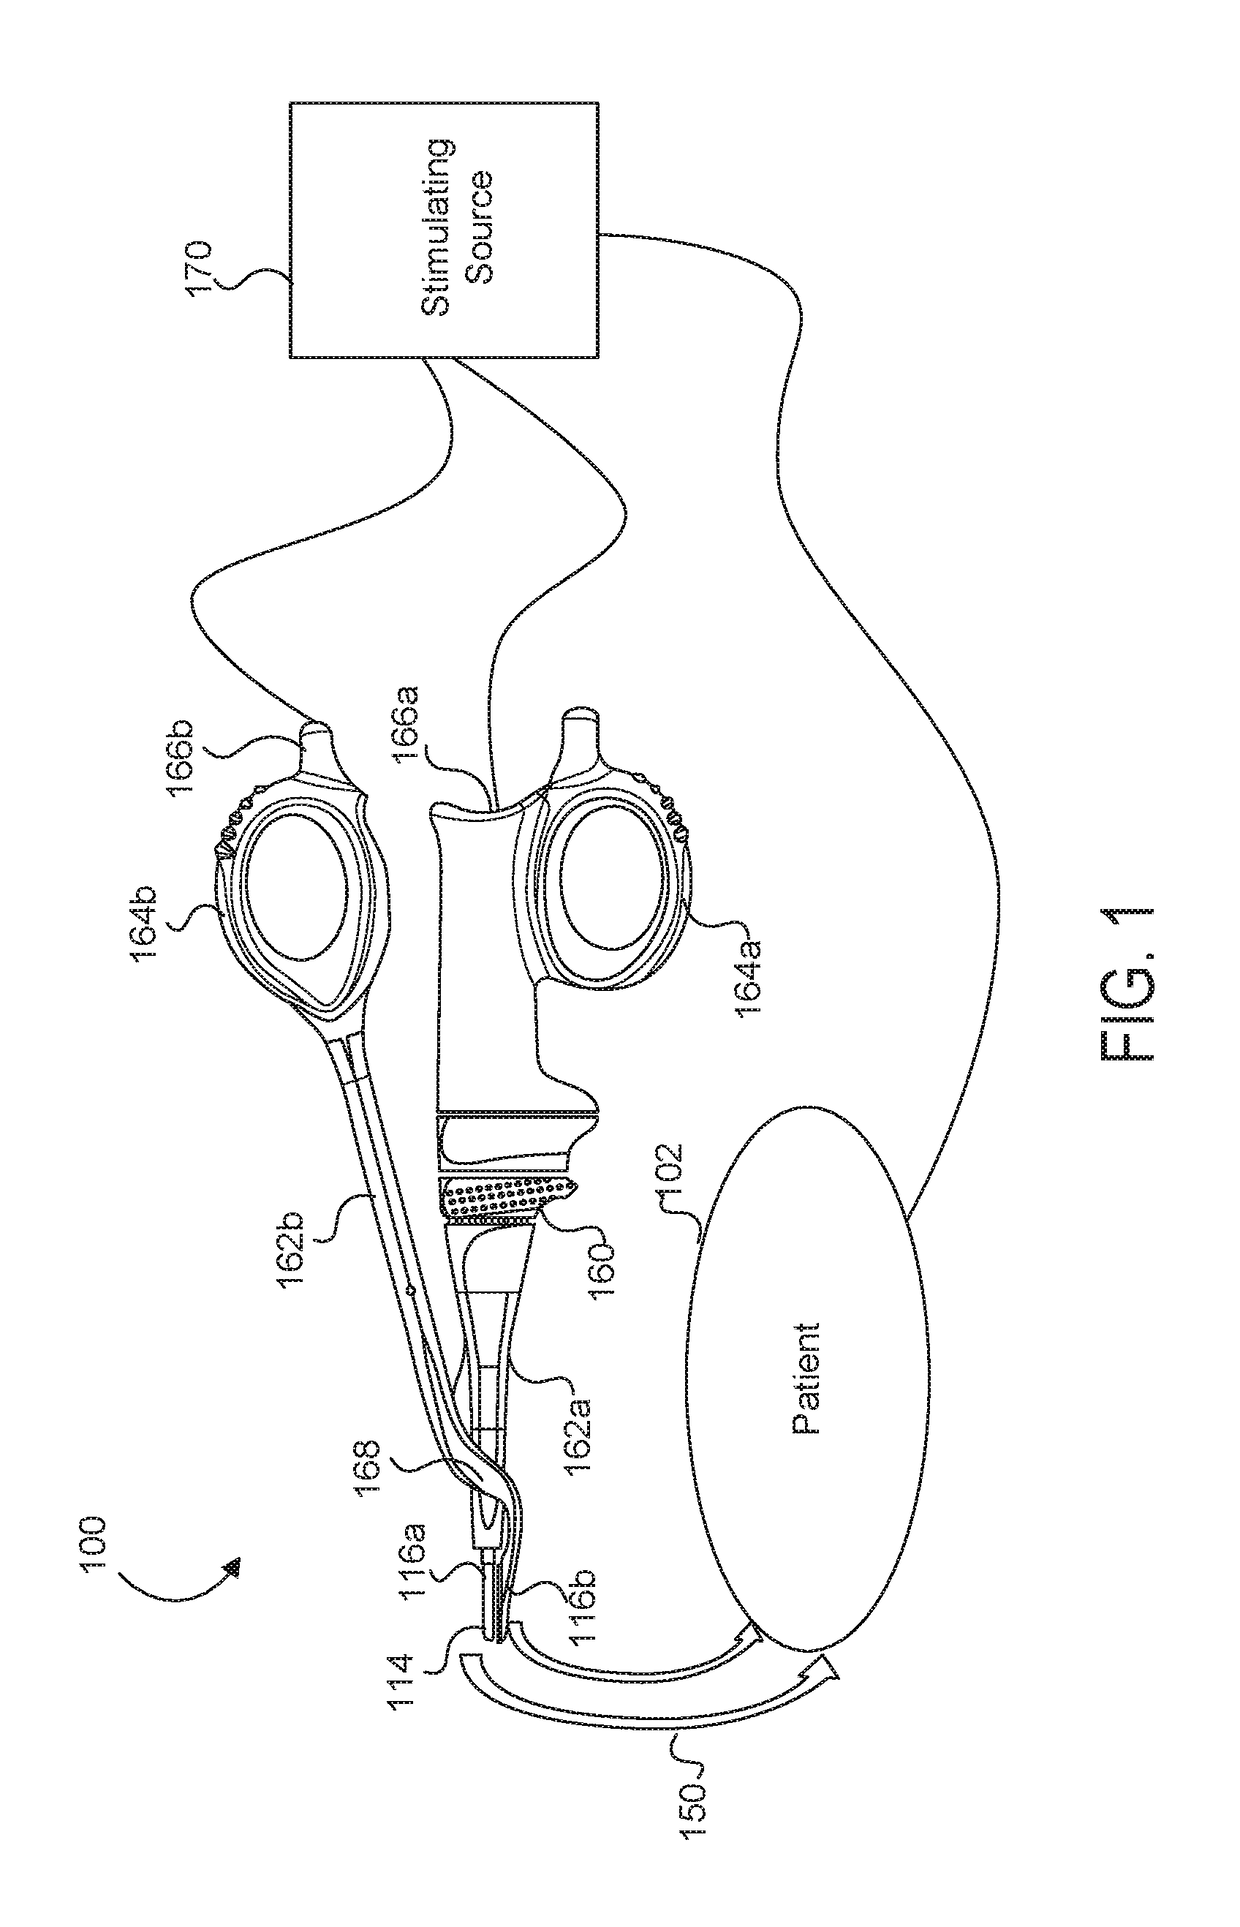 Medical device with a bilateral jaw configuration for nerve stimulation